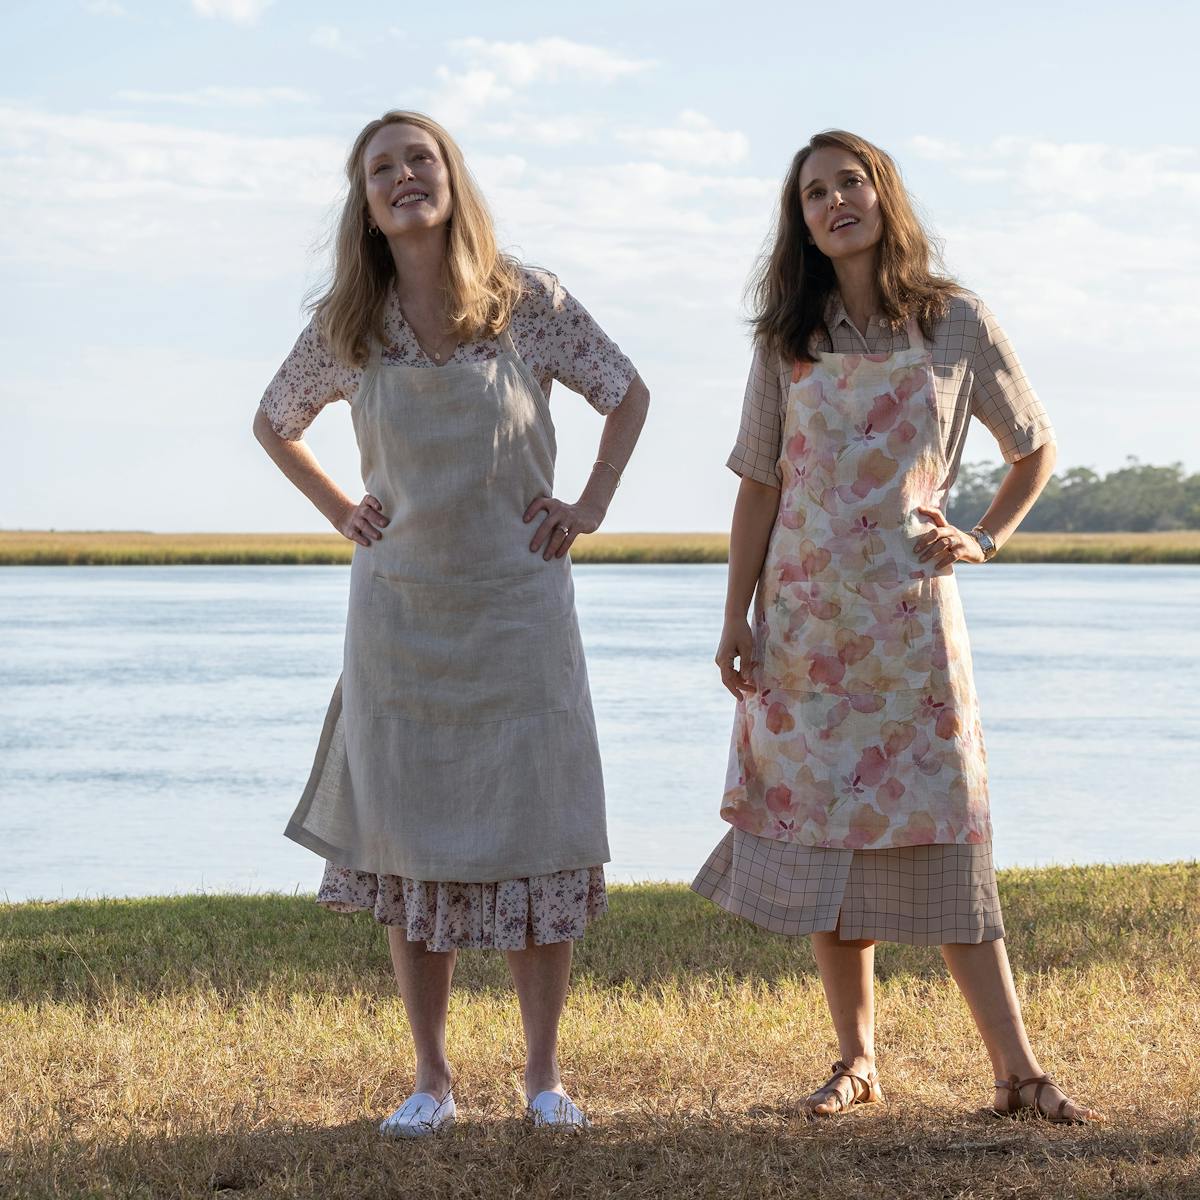 Gracie (Julianne Moore) and Elizabeth (Natalie Portman) stand together by a bay of water. Both wear aprons and midi-length dresses. They crane their necks looking at something in the sky.